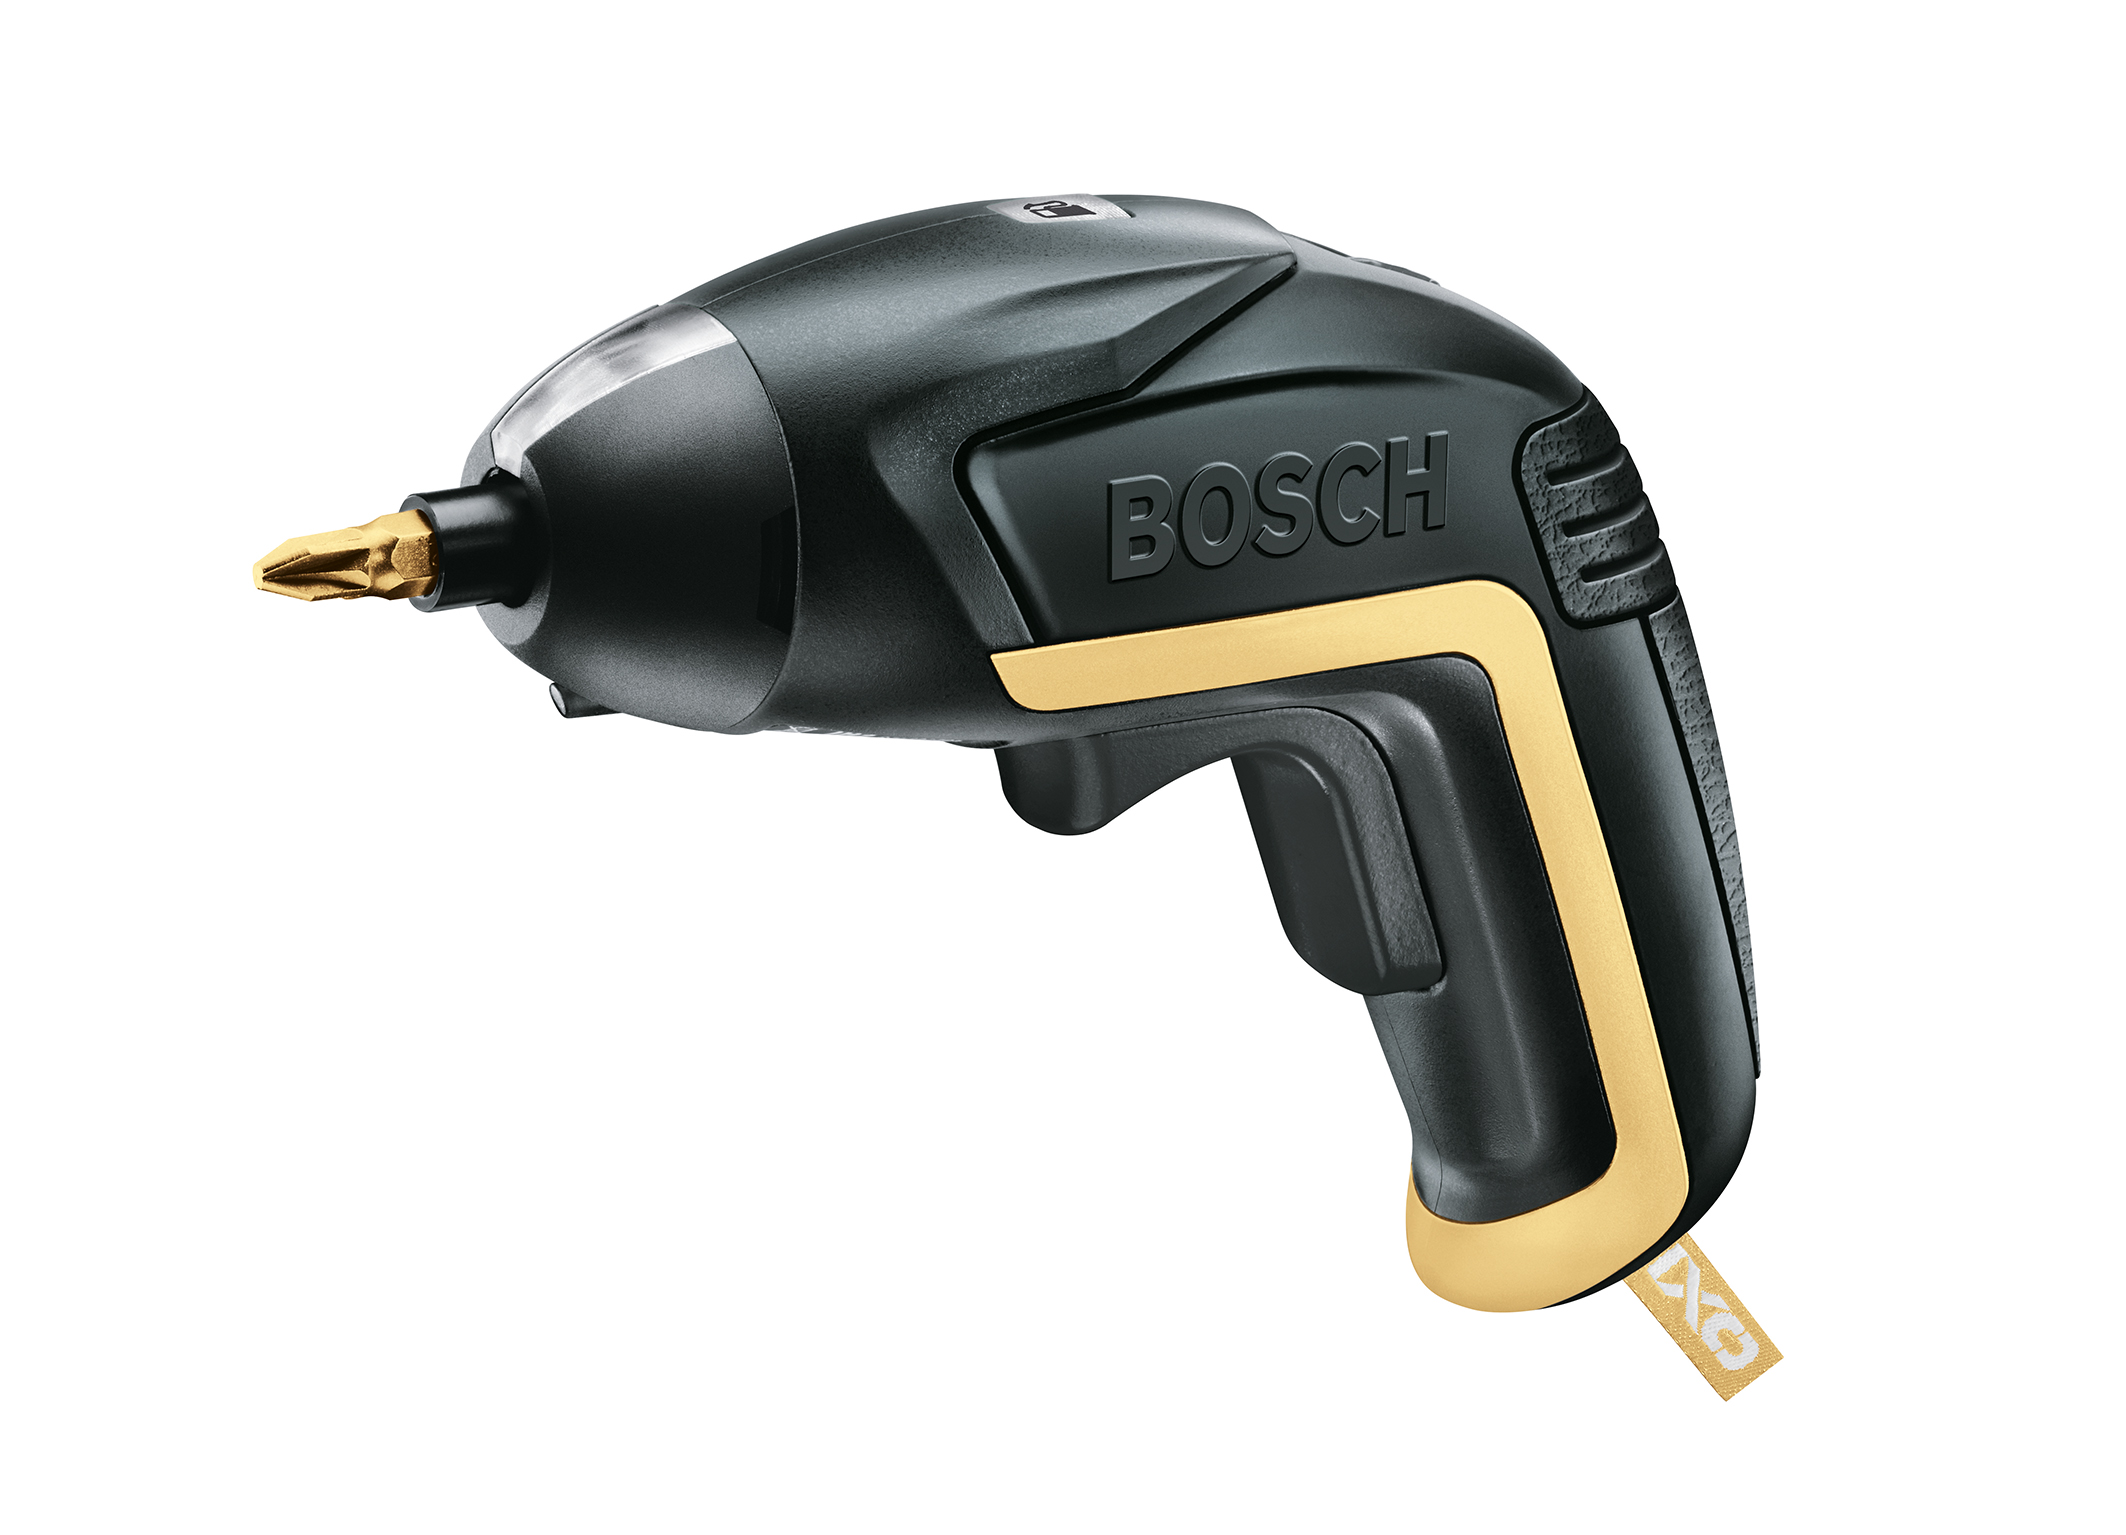 Cordless screwdriver with anniversary design: the Ixo Gold&Black from Bosch